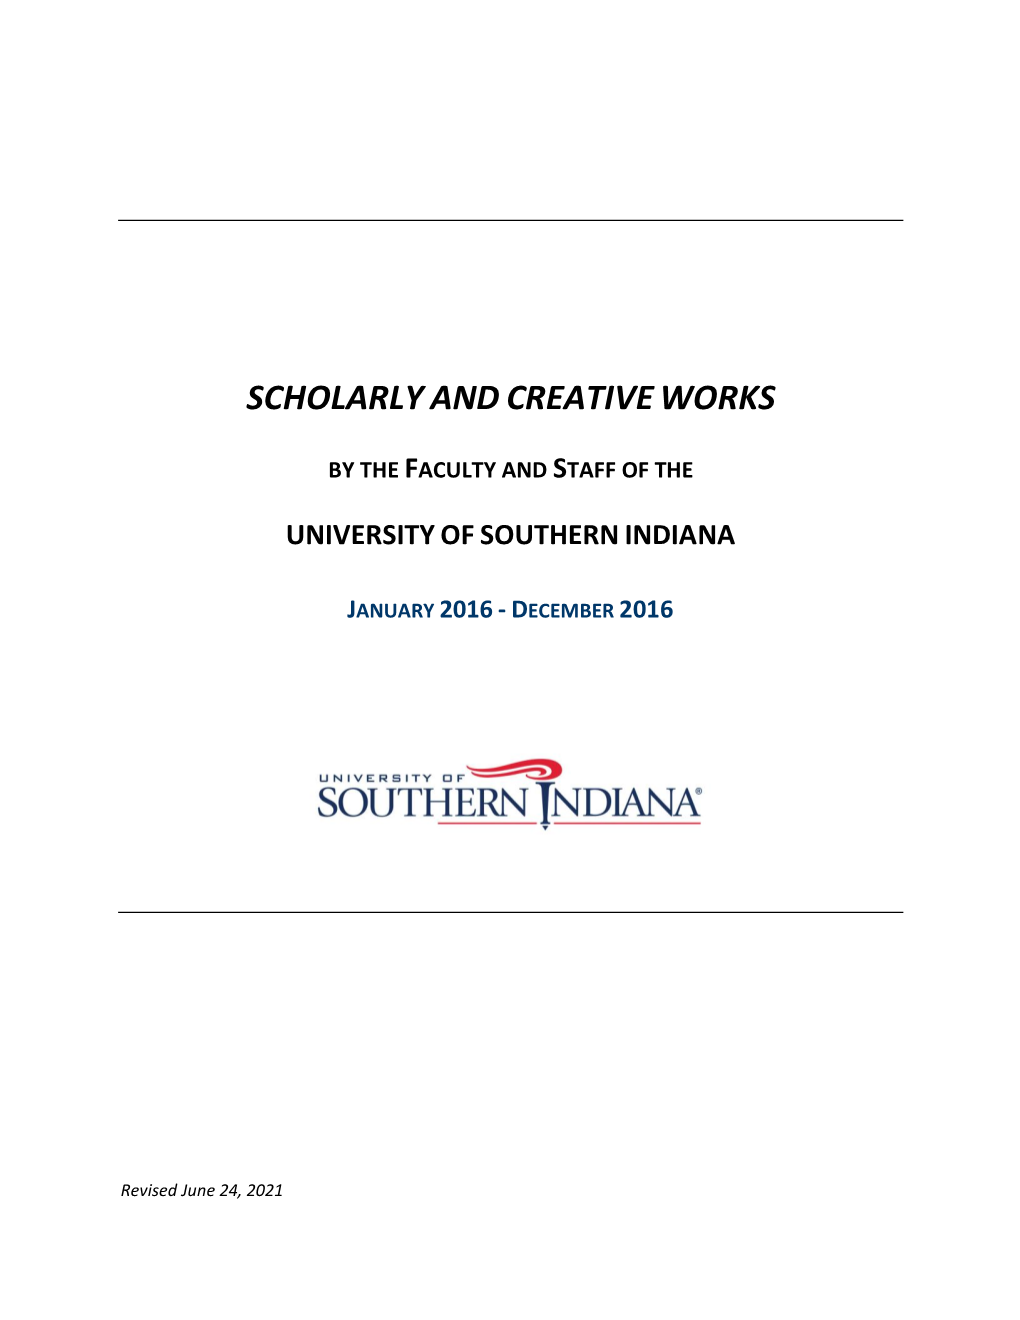 2016 Faculty and Staff Scholarly And